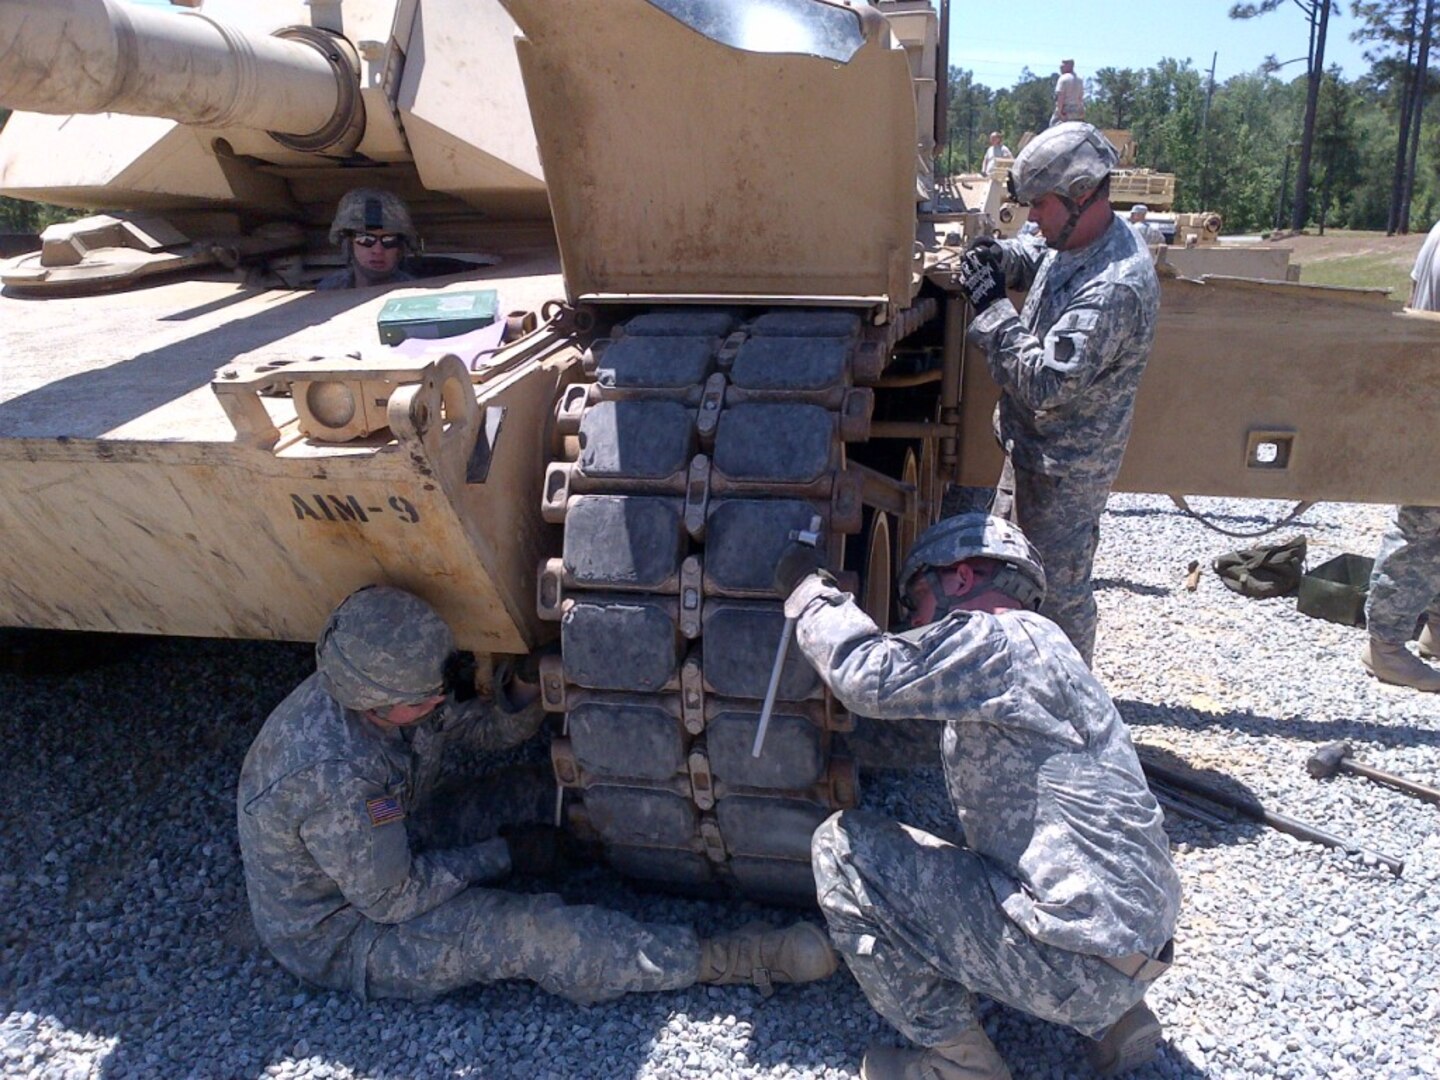 Members of the Pennsylvania National Guard perform repairs on an Abrams tank track as part of qualifying round of the Sullivan Cup armor competition at Fort Benning, Georgia, May 7, 2014. 